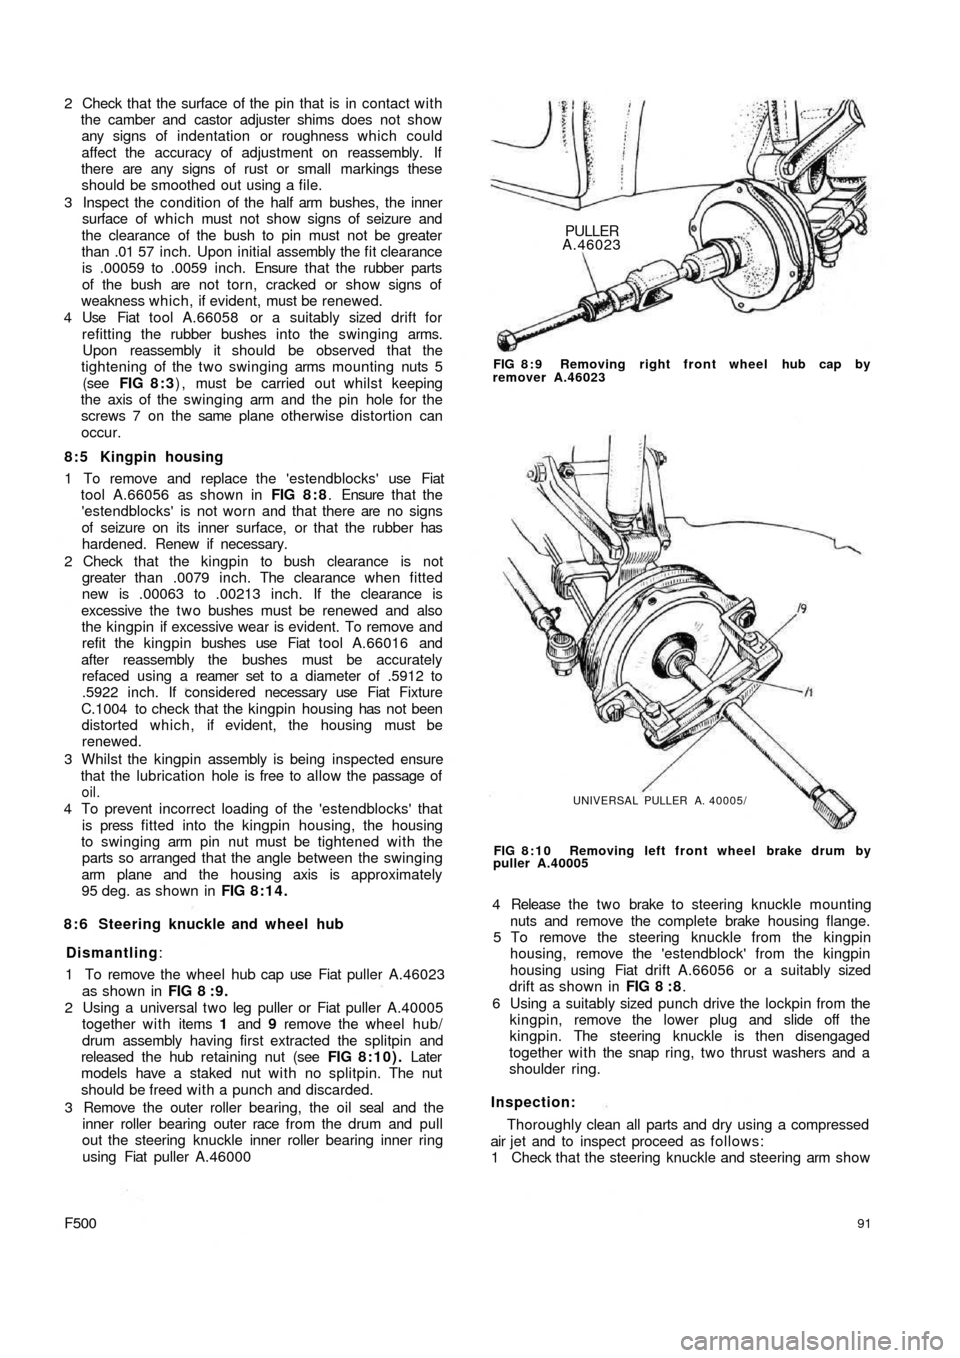 FIAT 500 1960 1.G Workshop Manual 2  Check that the surface of the pin that is in contact with
the camber and castor adjuster shims does not show
any signs of indentation or roughness which could
affect the  accuracy of adjustment on 